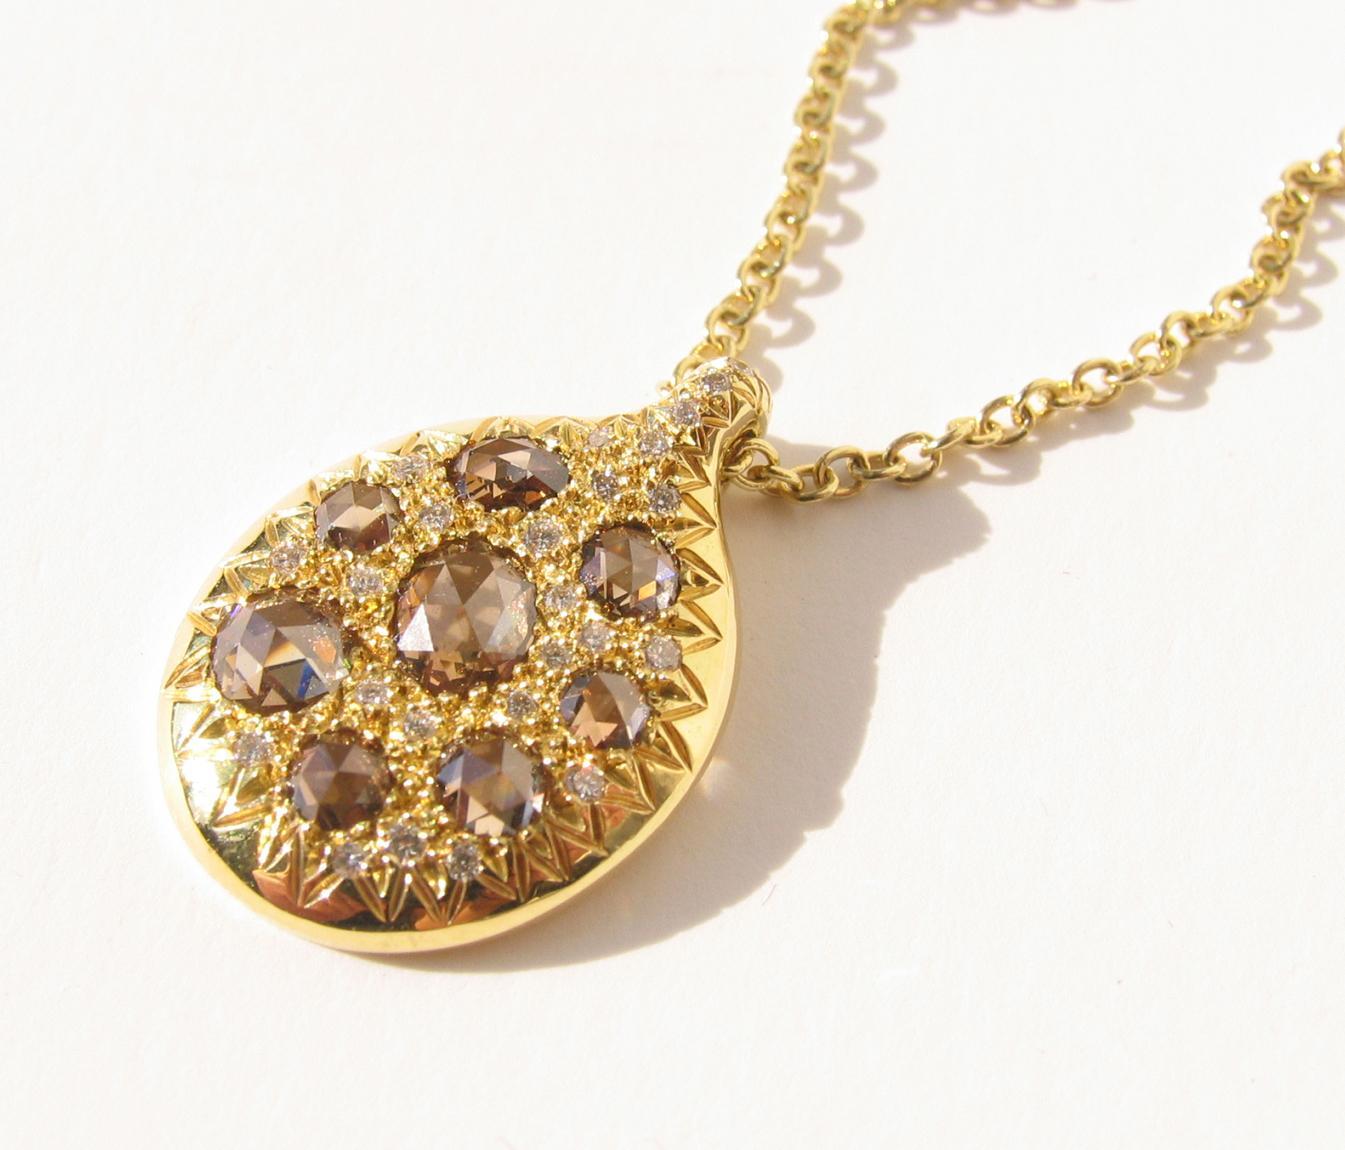 One of a kind brown rose cut pave diamond 18 Karat gold pendant on gold chain.
Hand crafted by goldsmith Christopher Phelan.
Pendant measures 1 inch x .60 inch. Gold chain length measures 17 inches. 
8 Brown rose cut VS1 diamonds.
27 White brilliant